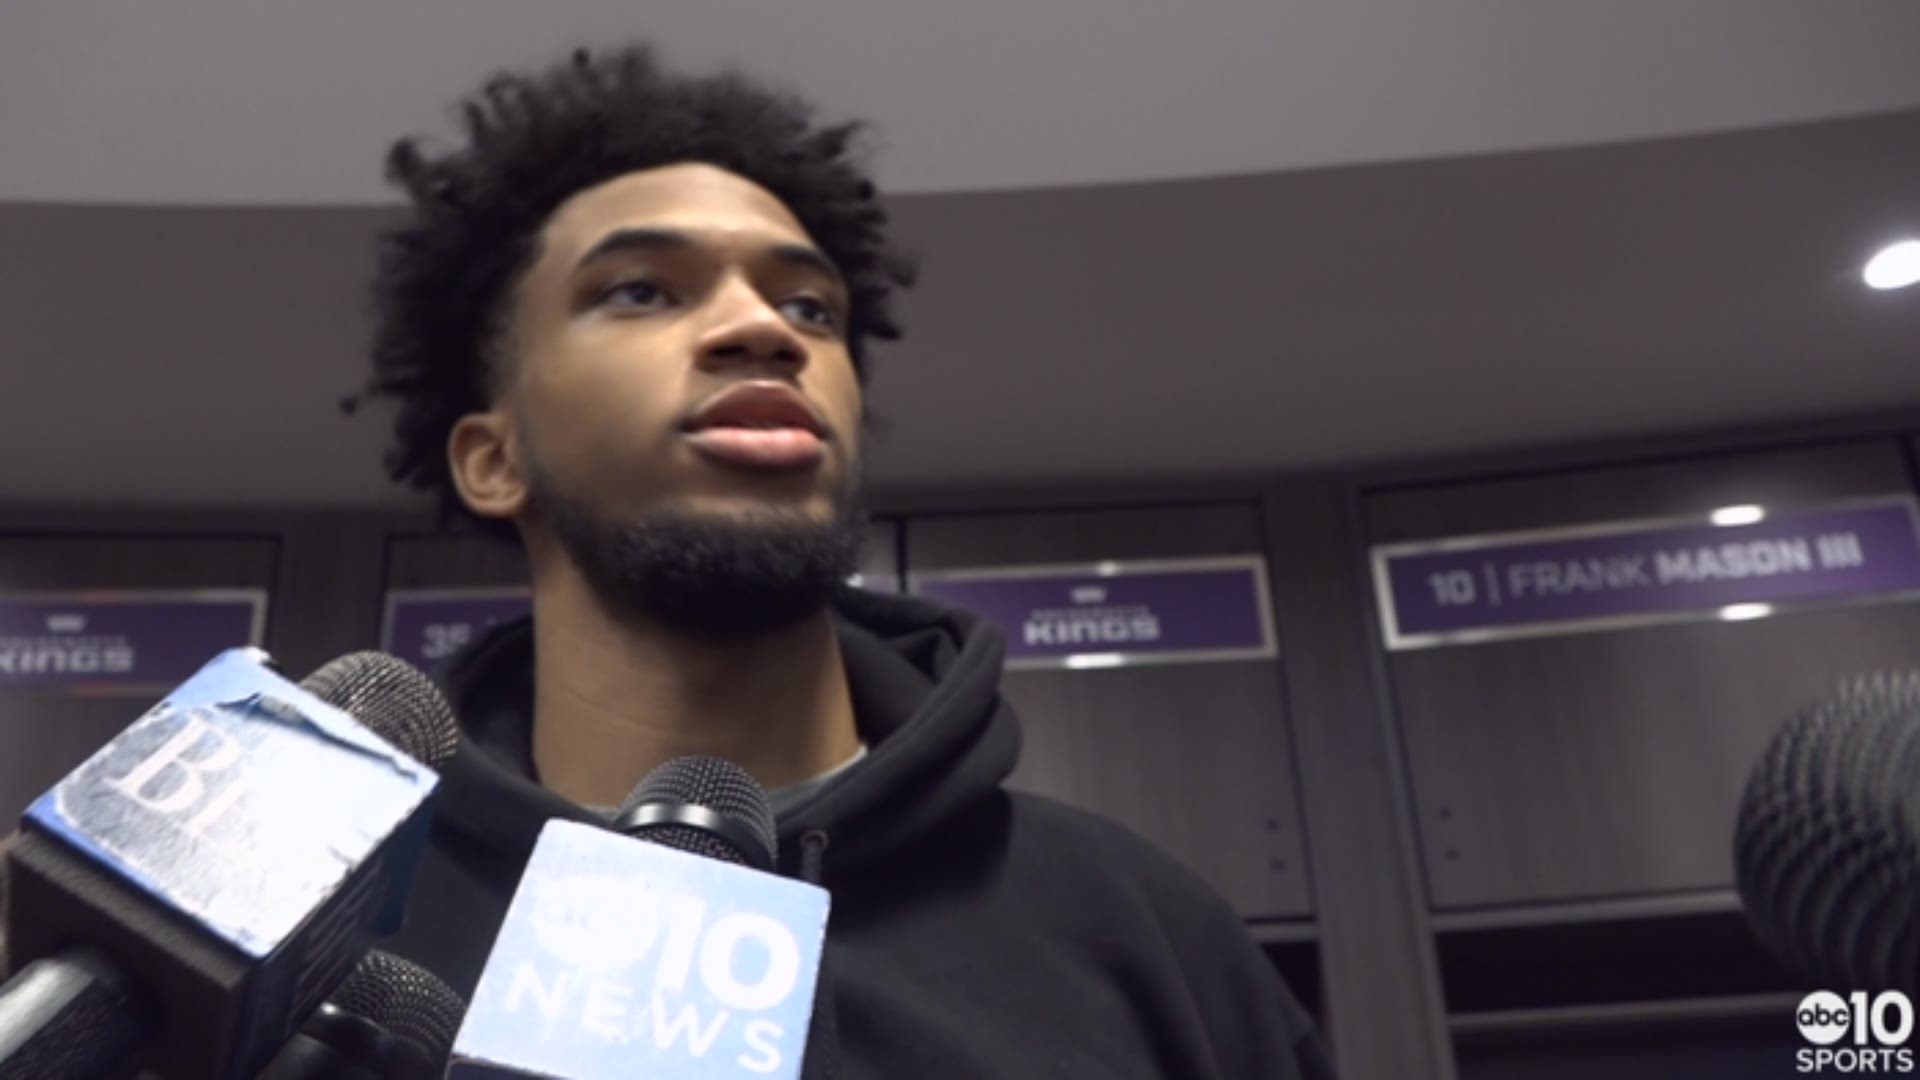 Kings rookie center Marvin Bagley III talks about his team's effort in Sunday's loss to the Utah Jazz, following Saturday's one-point defeat in Oakland against the Warriors in Oakland.